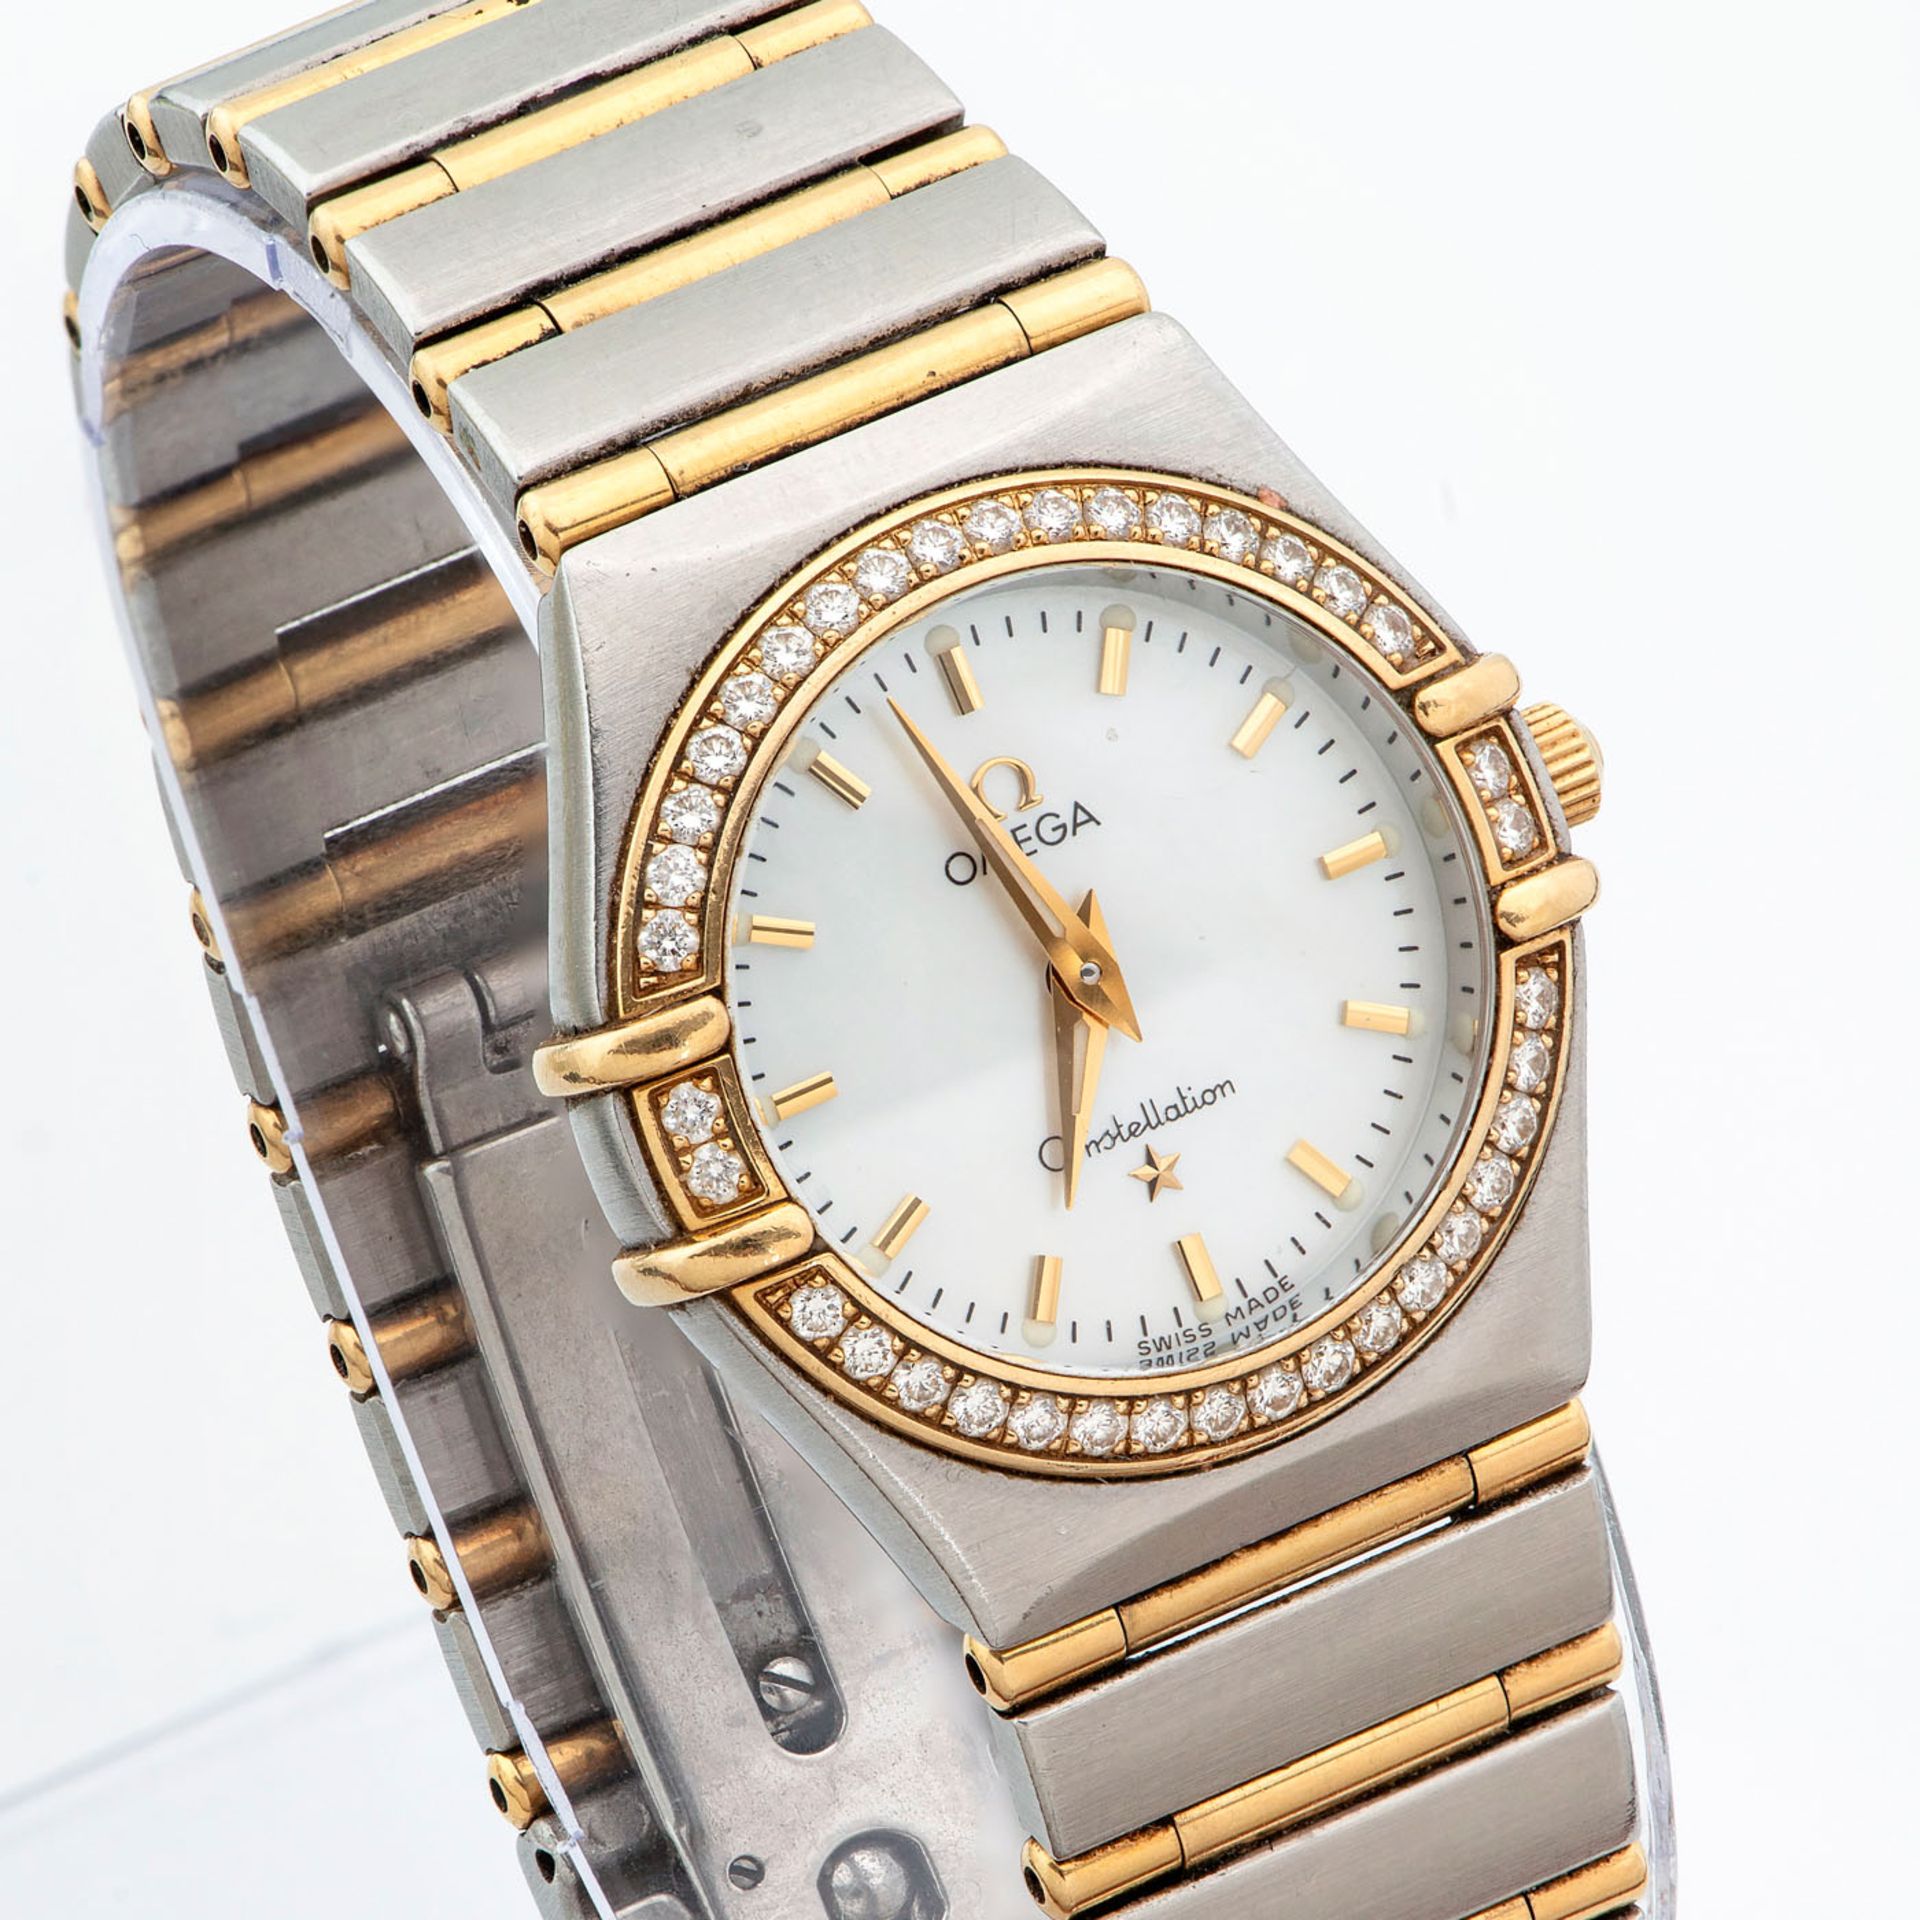 An Omega Constellation Gold and Diamond Bezel Ladies' Wristwatch - Image 4 of 4